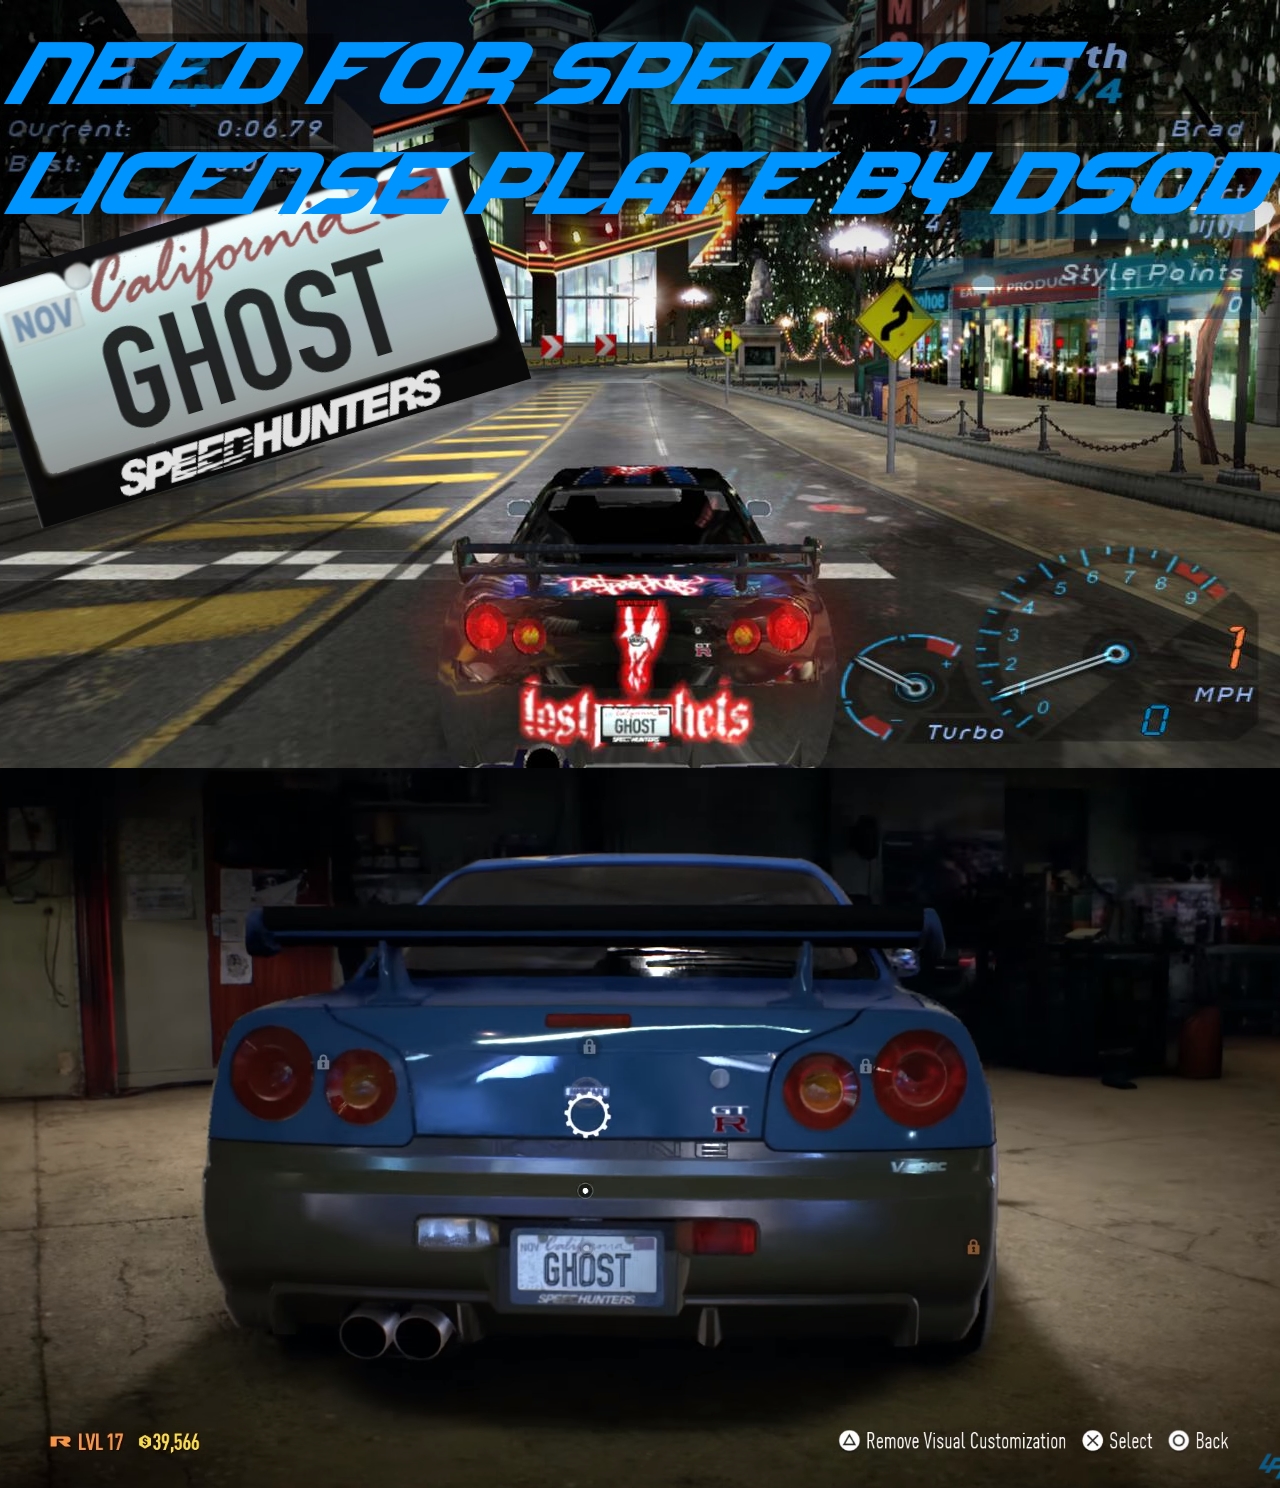 Need For Speed Underground Need For Speed 2015 License plate